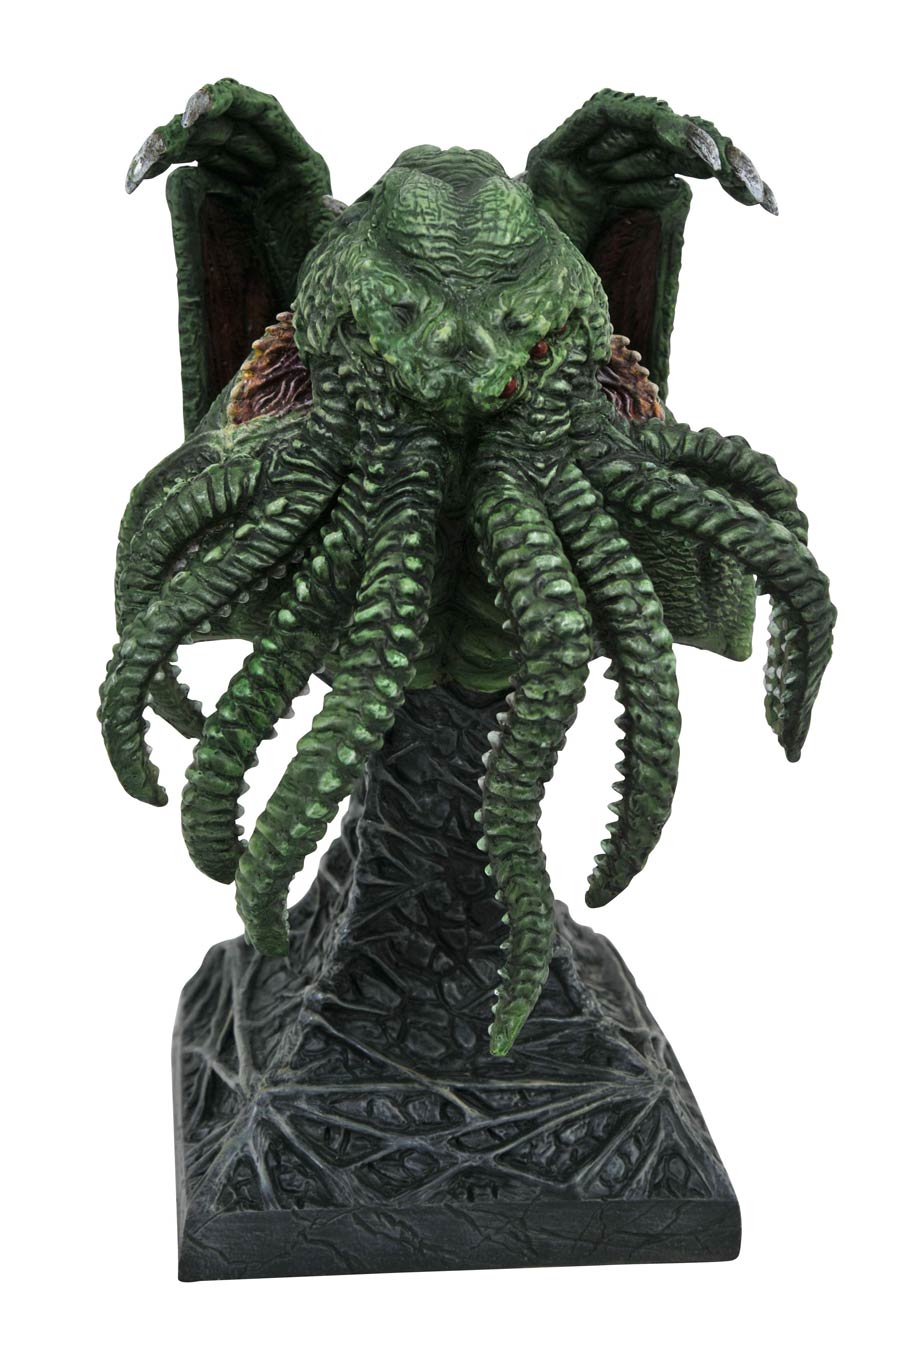 Legends In 3D Cthulhu 1/2 Scale Bust